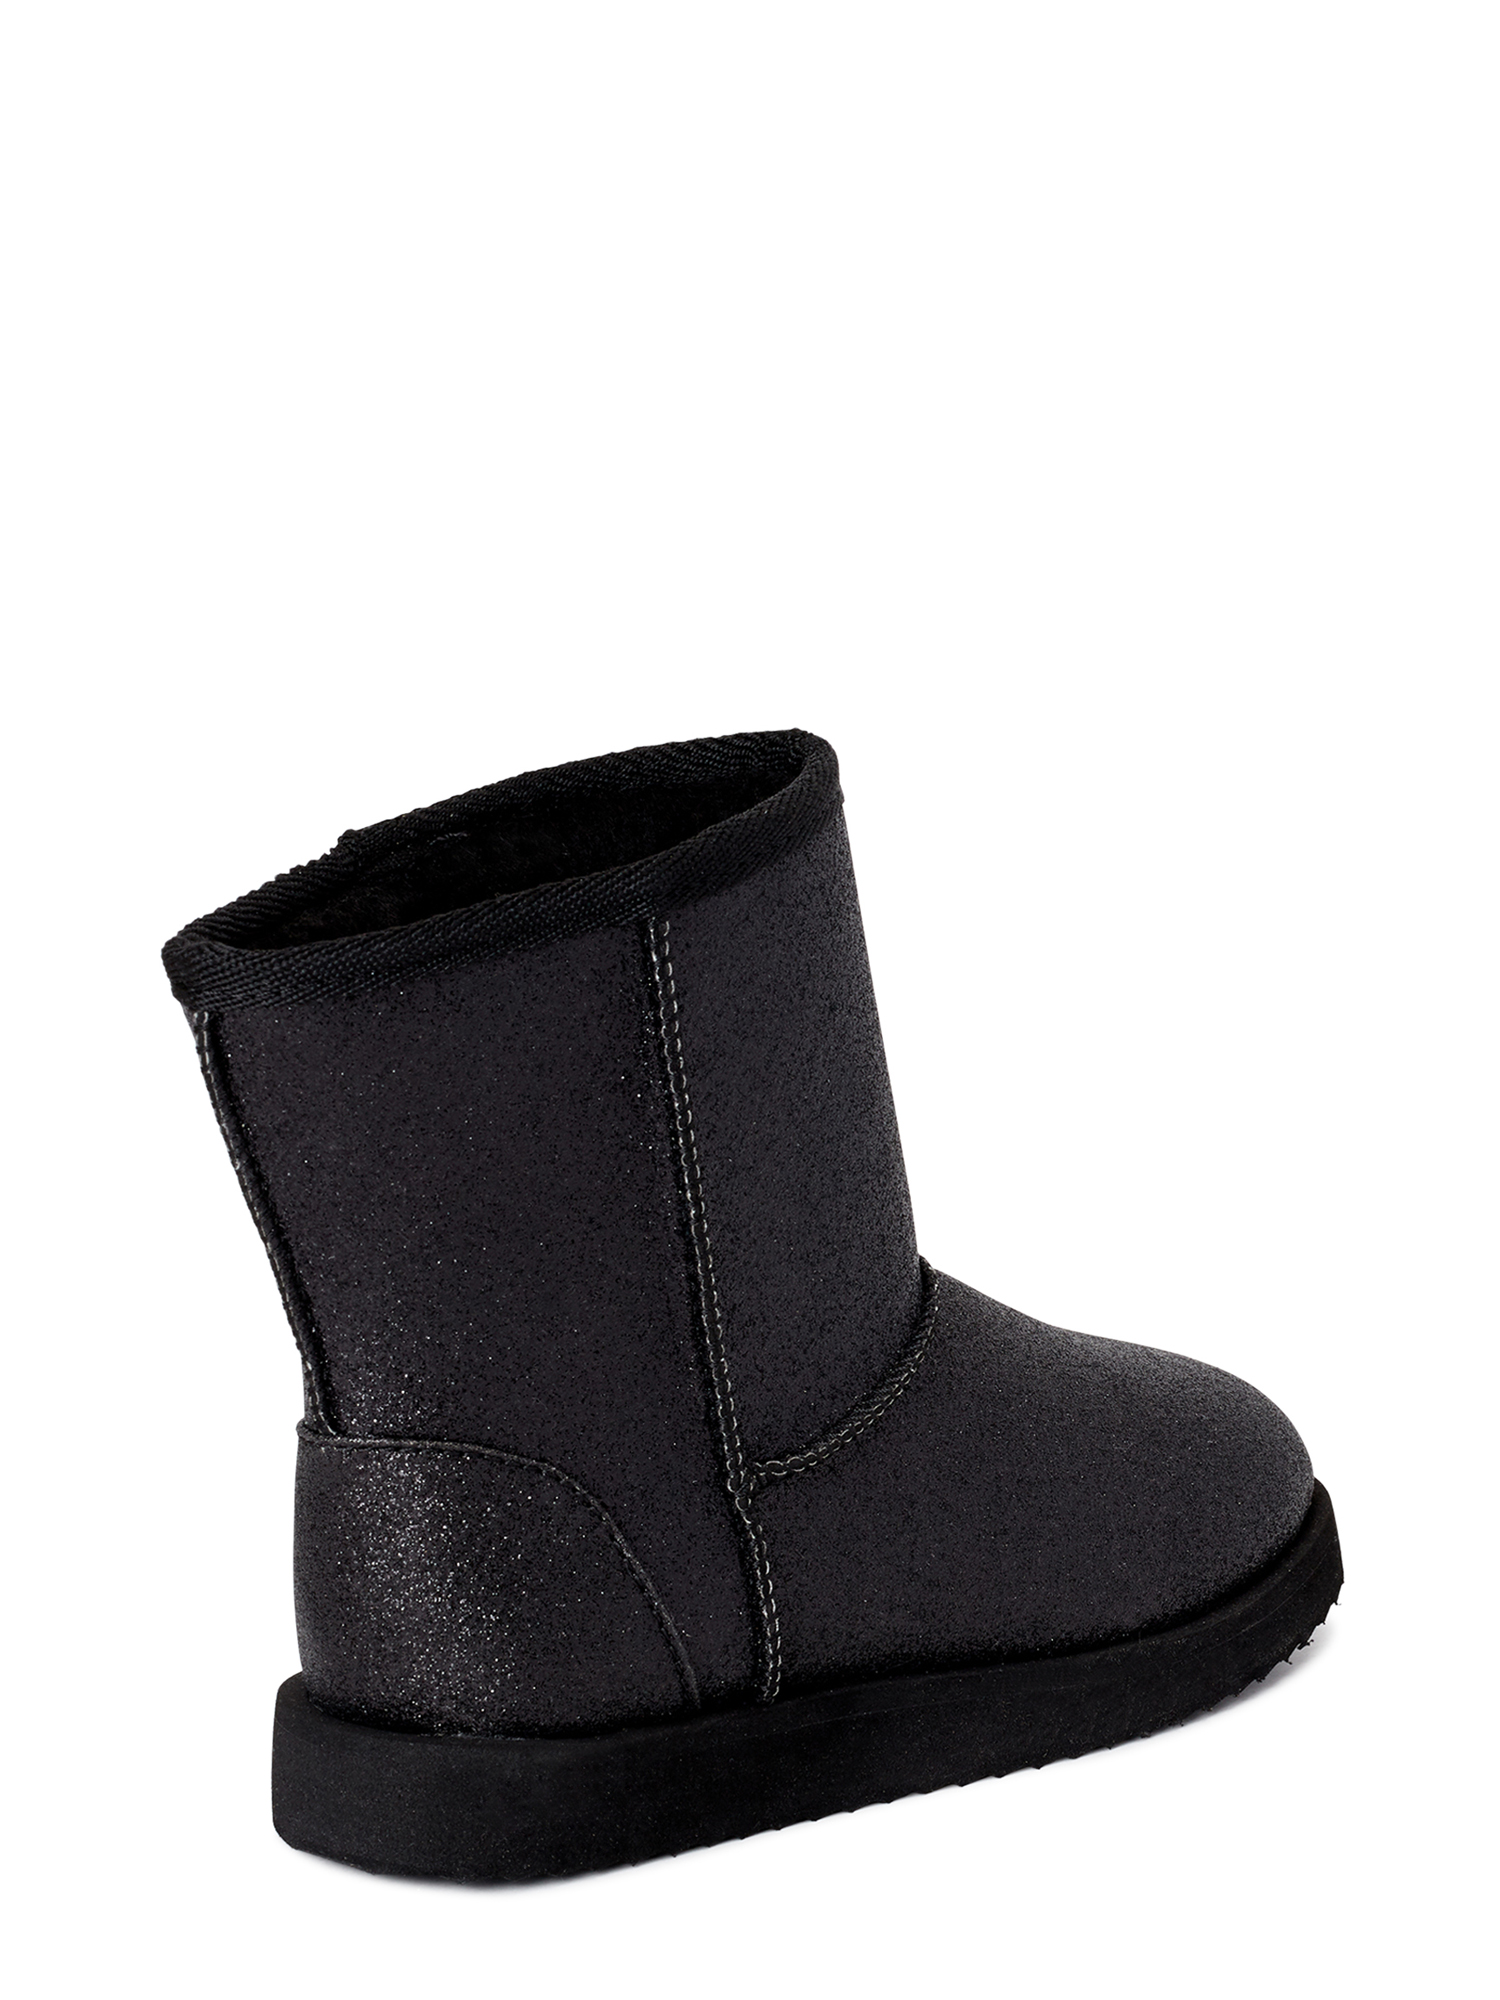 Wonder Nation Cozy Faux Shearling Boot (Little Girls & Big Girls) - image 2 of 6